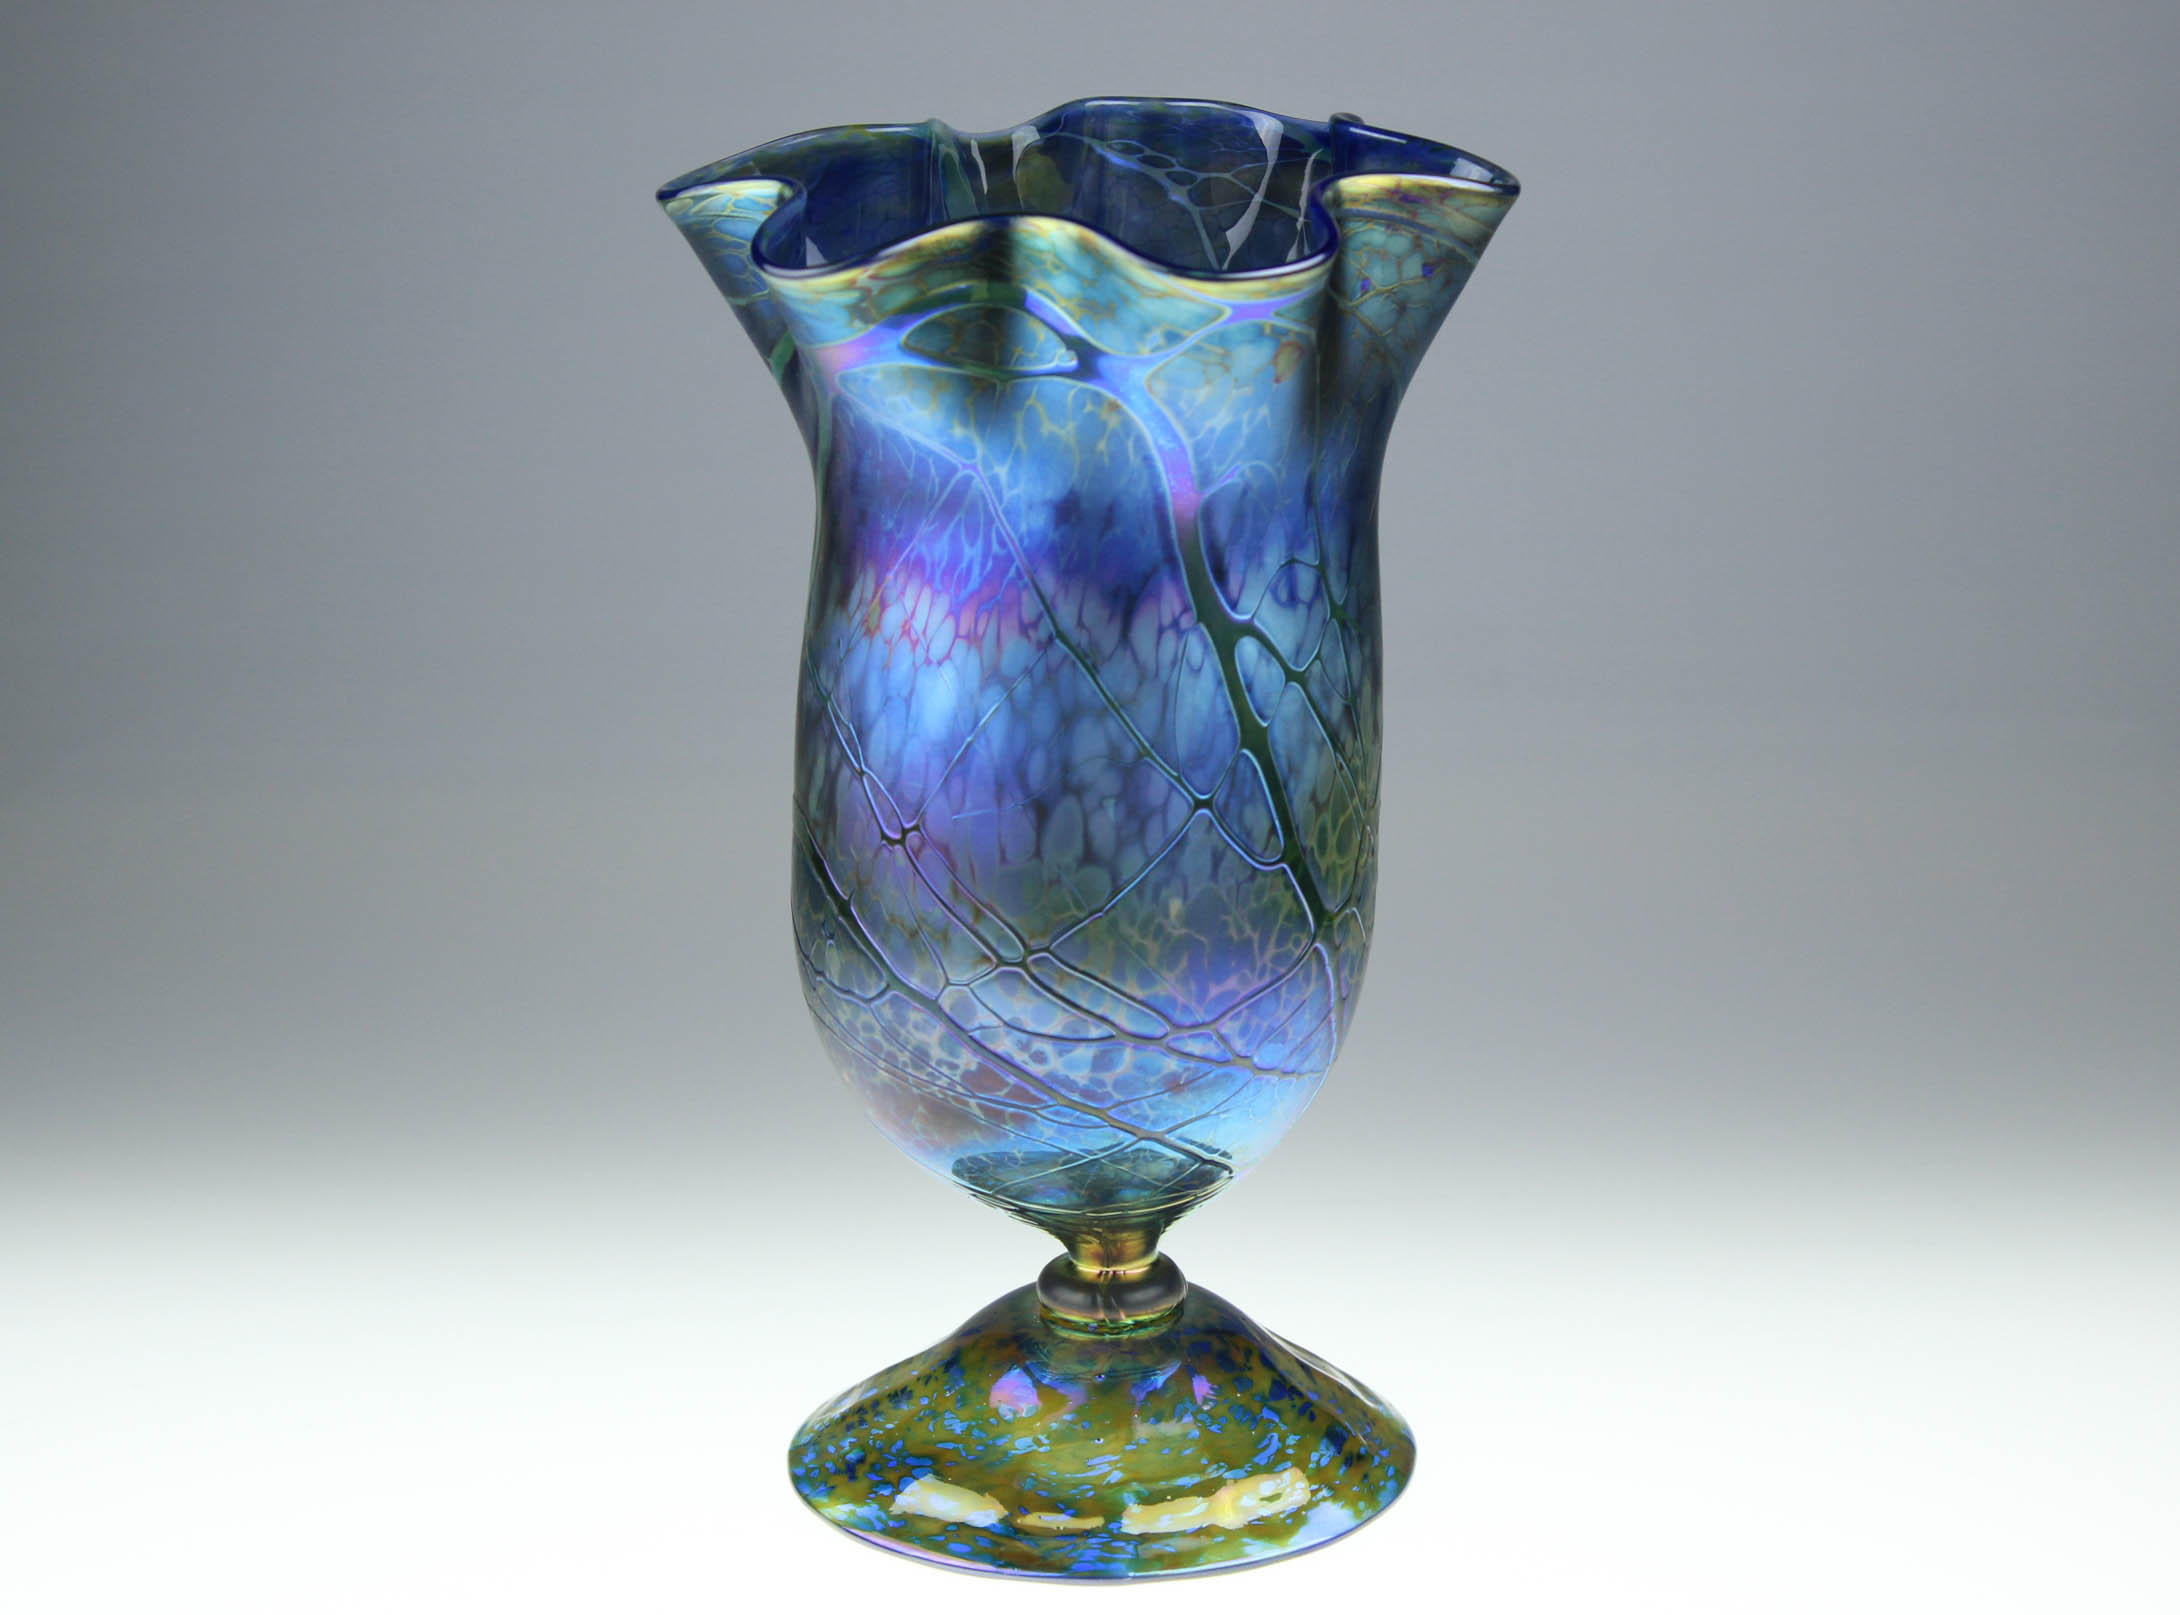 15 Lovable Hand Blown Glass Vases Bowls 2024 free download hand blown glass vases bowls of art glass vase hand blown by eric w hansen with iridescent within dc29fc294c28ezoom